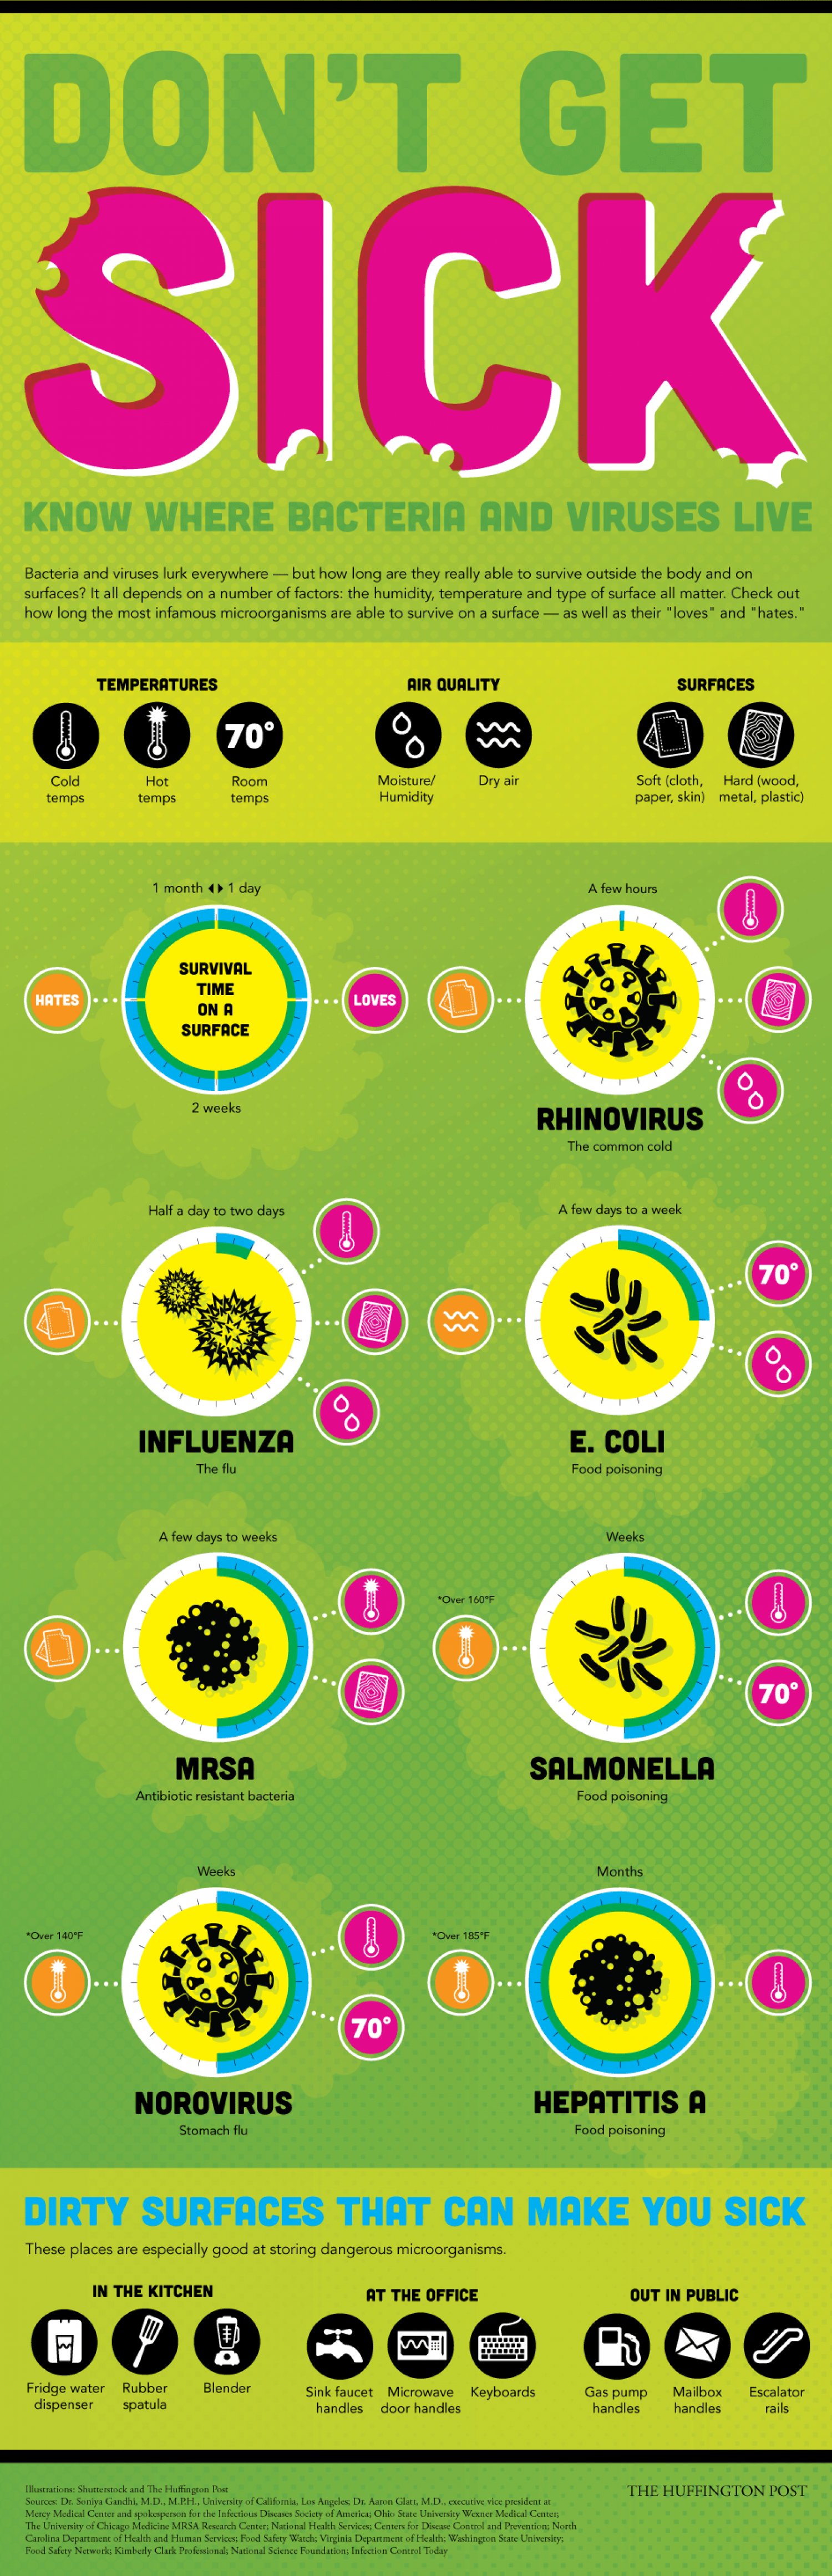 Don't Get Sick Infographic